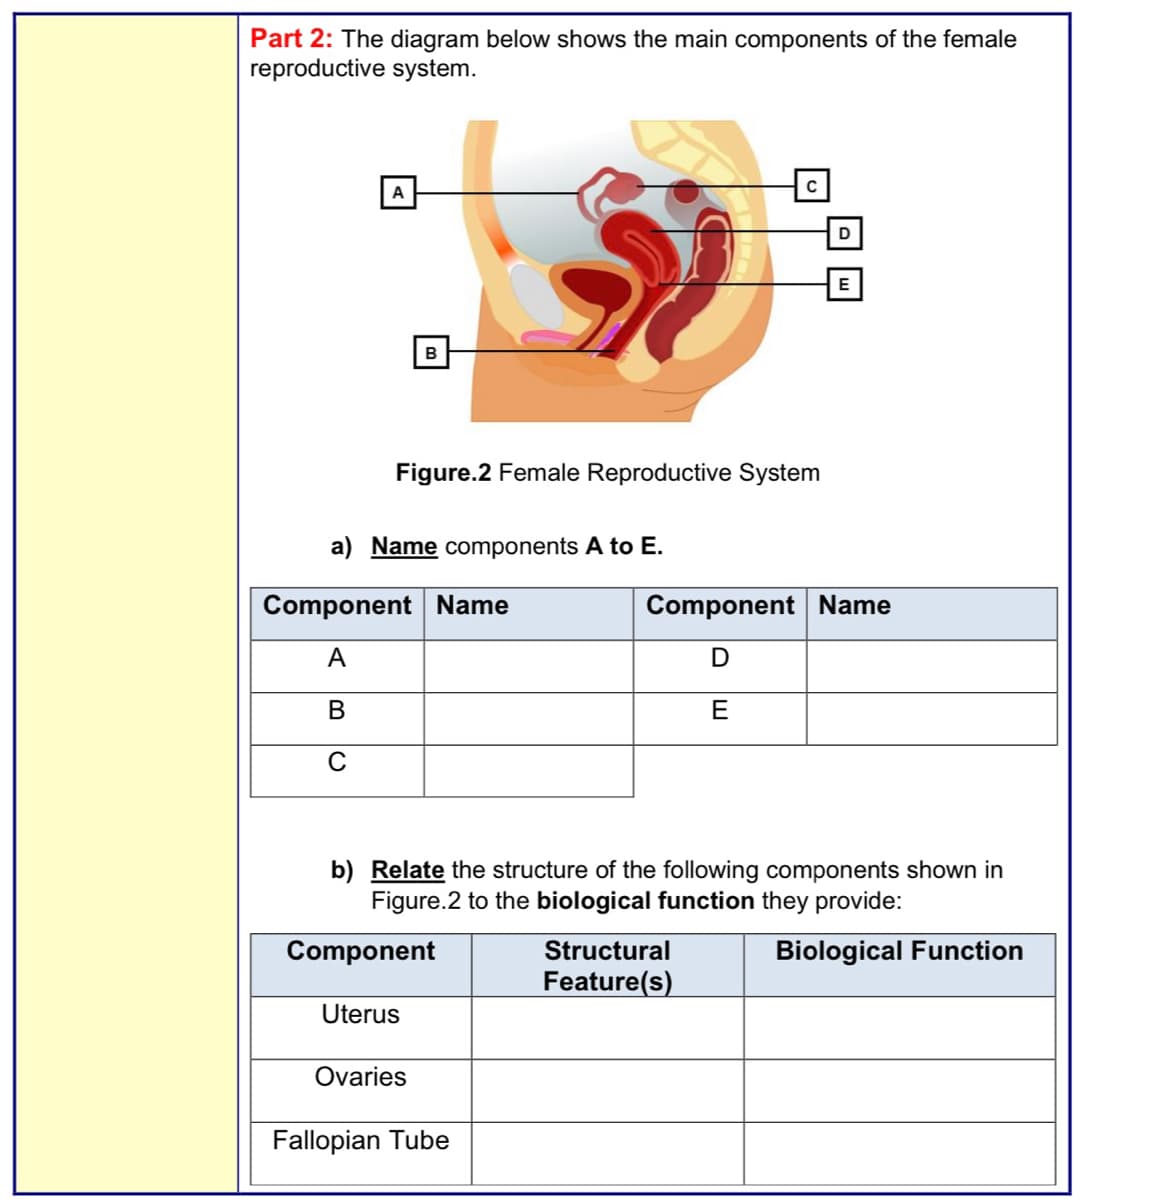 Part 2: The diagram below shows the main components of the female
reproductive system.
A
Figure.2 Female Reproductive System
B
a) Name components A to E.
Component Name
A
B
C
Component
Uterus
b) Relate the structure of the following components shown in
Figure.2 to the biological function they provide:
Biological Function
Ovaries
Fallopian Tube
E
Component Name
D
E
Structural
Feature(s)